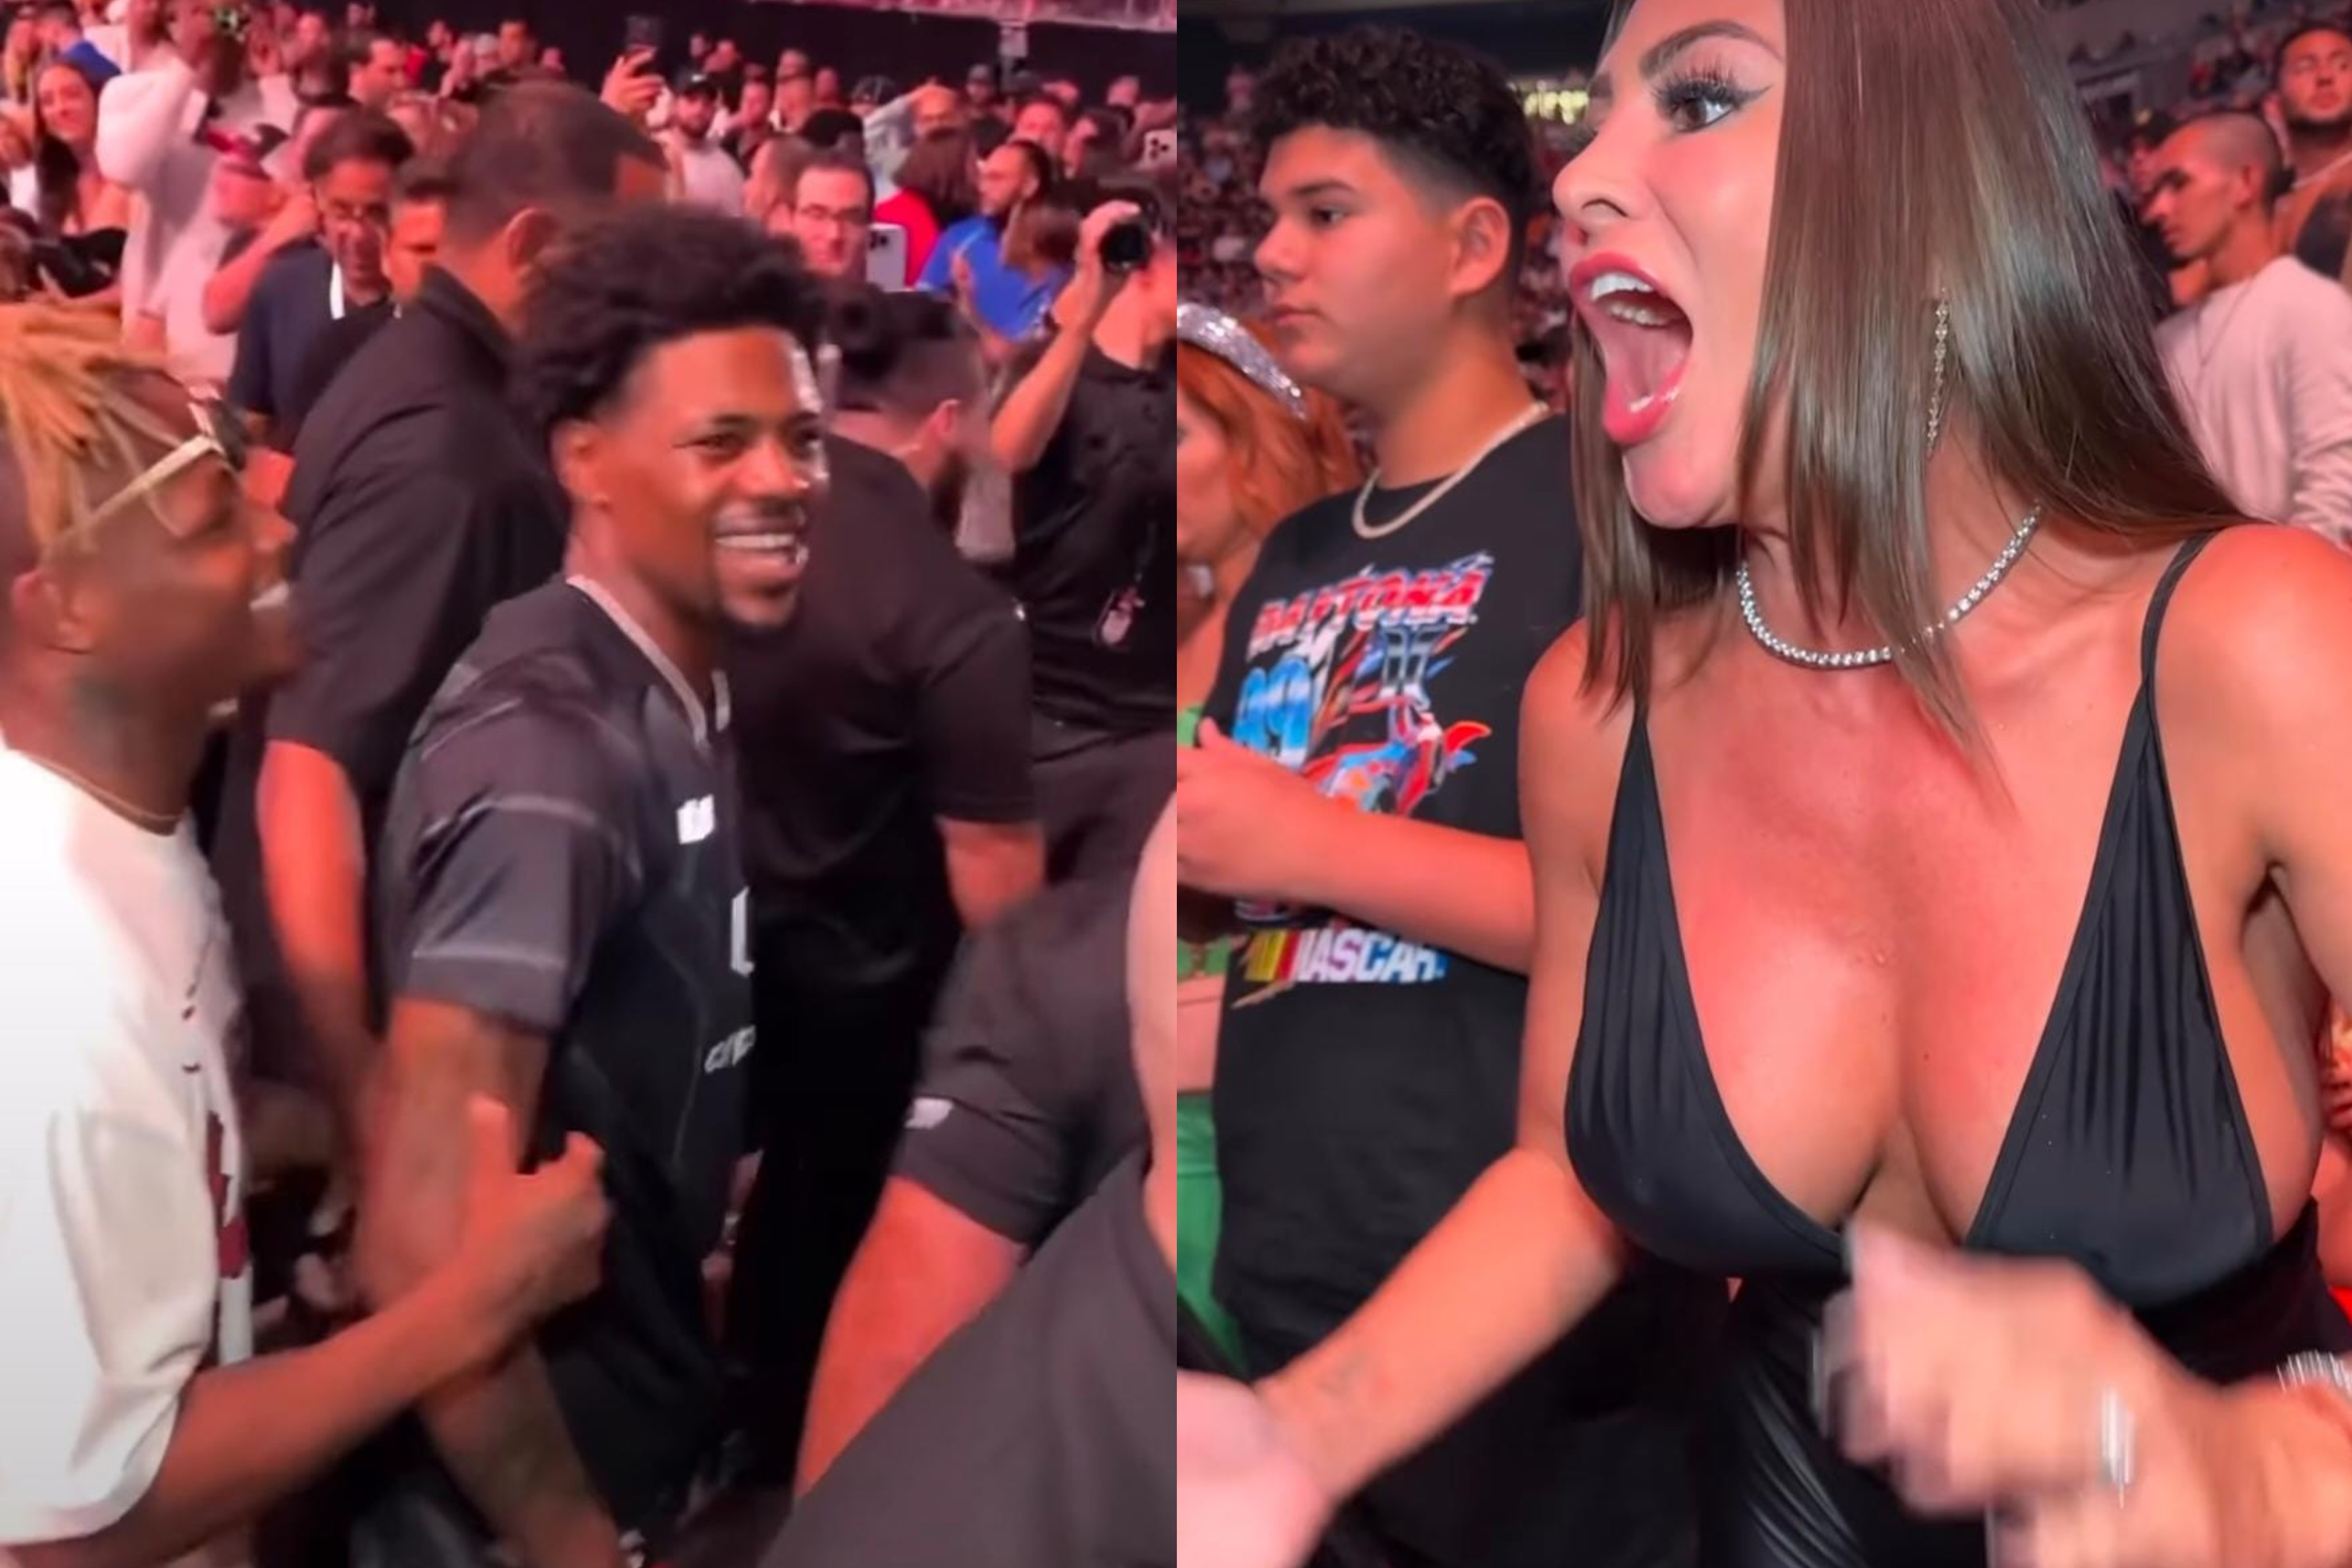 UFC News Round Up: Israel Adesanya on Achraf Hakimi and Hina Abouk Divorce, Only Fans star Fancetty Caught Kevin Holland’s Eyes, When is the UFC Fight Tonight ?, Conor McGregor’s New Product Launched 